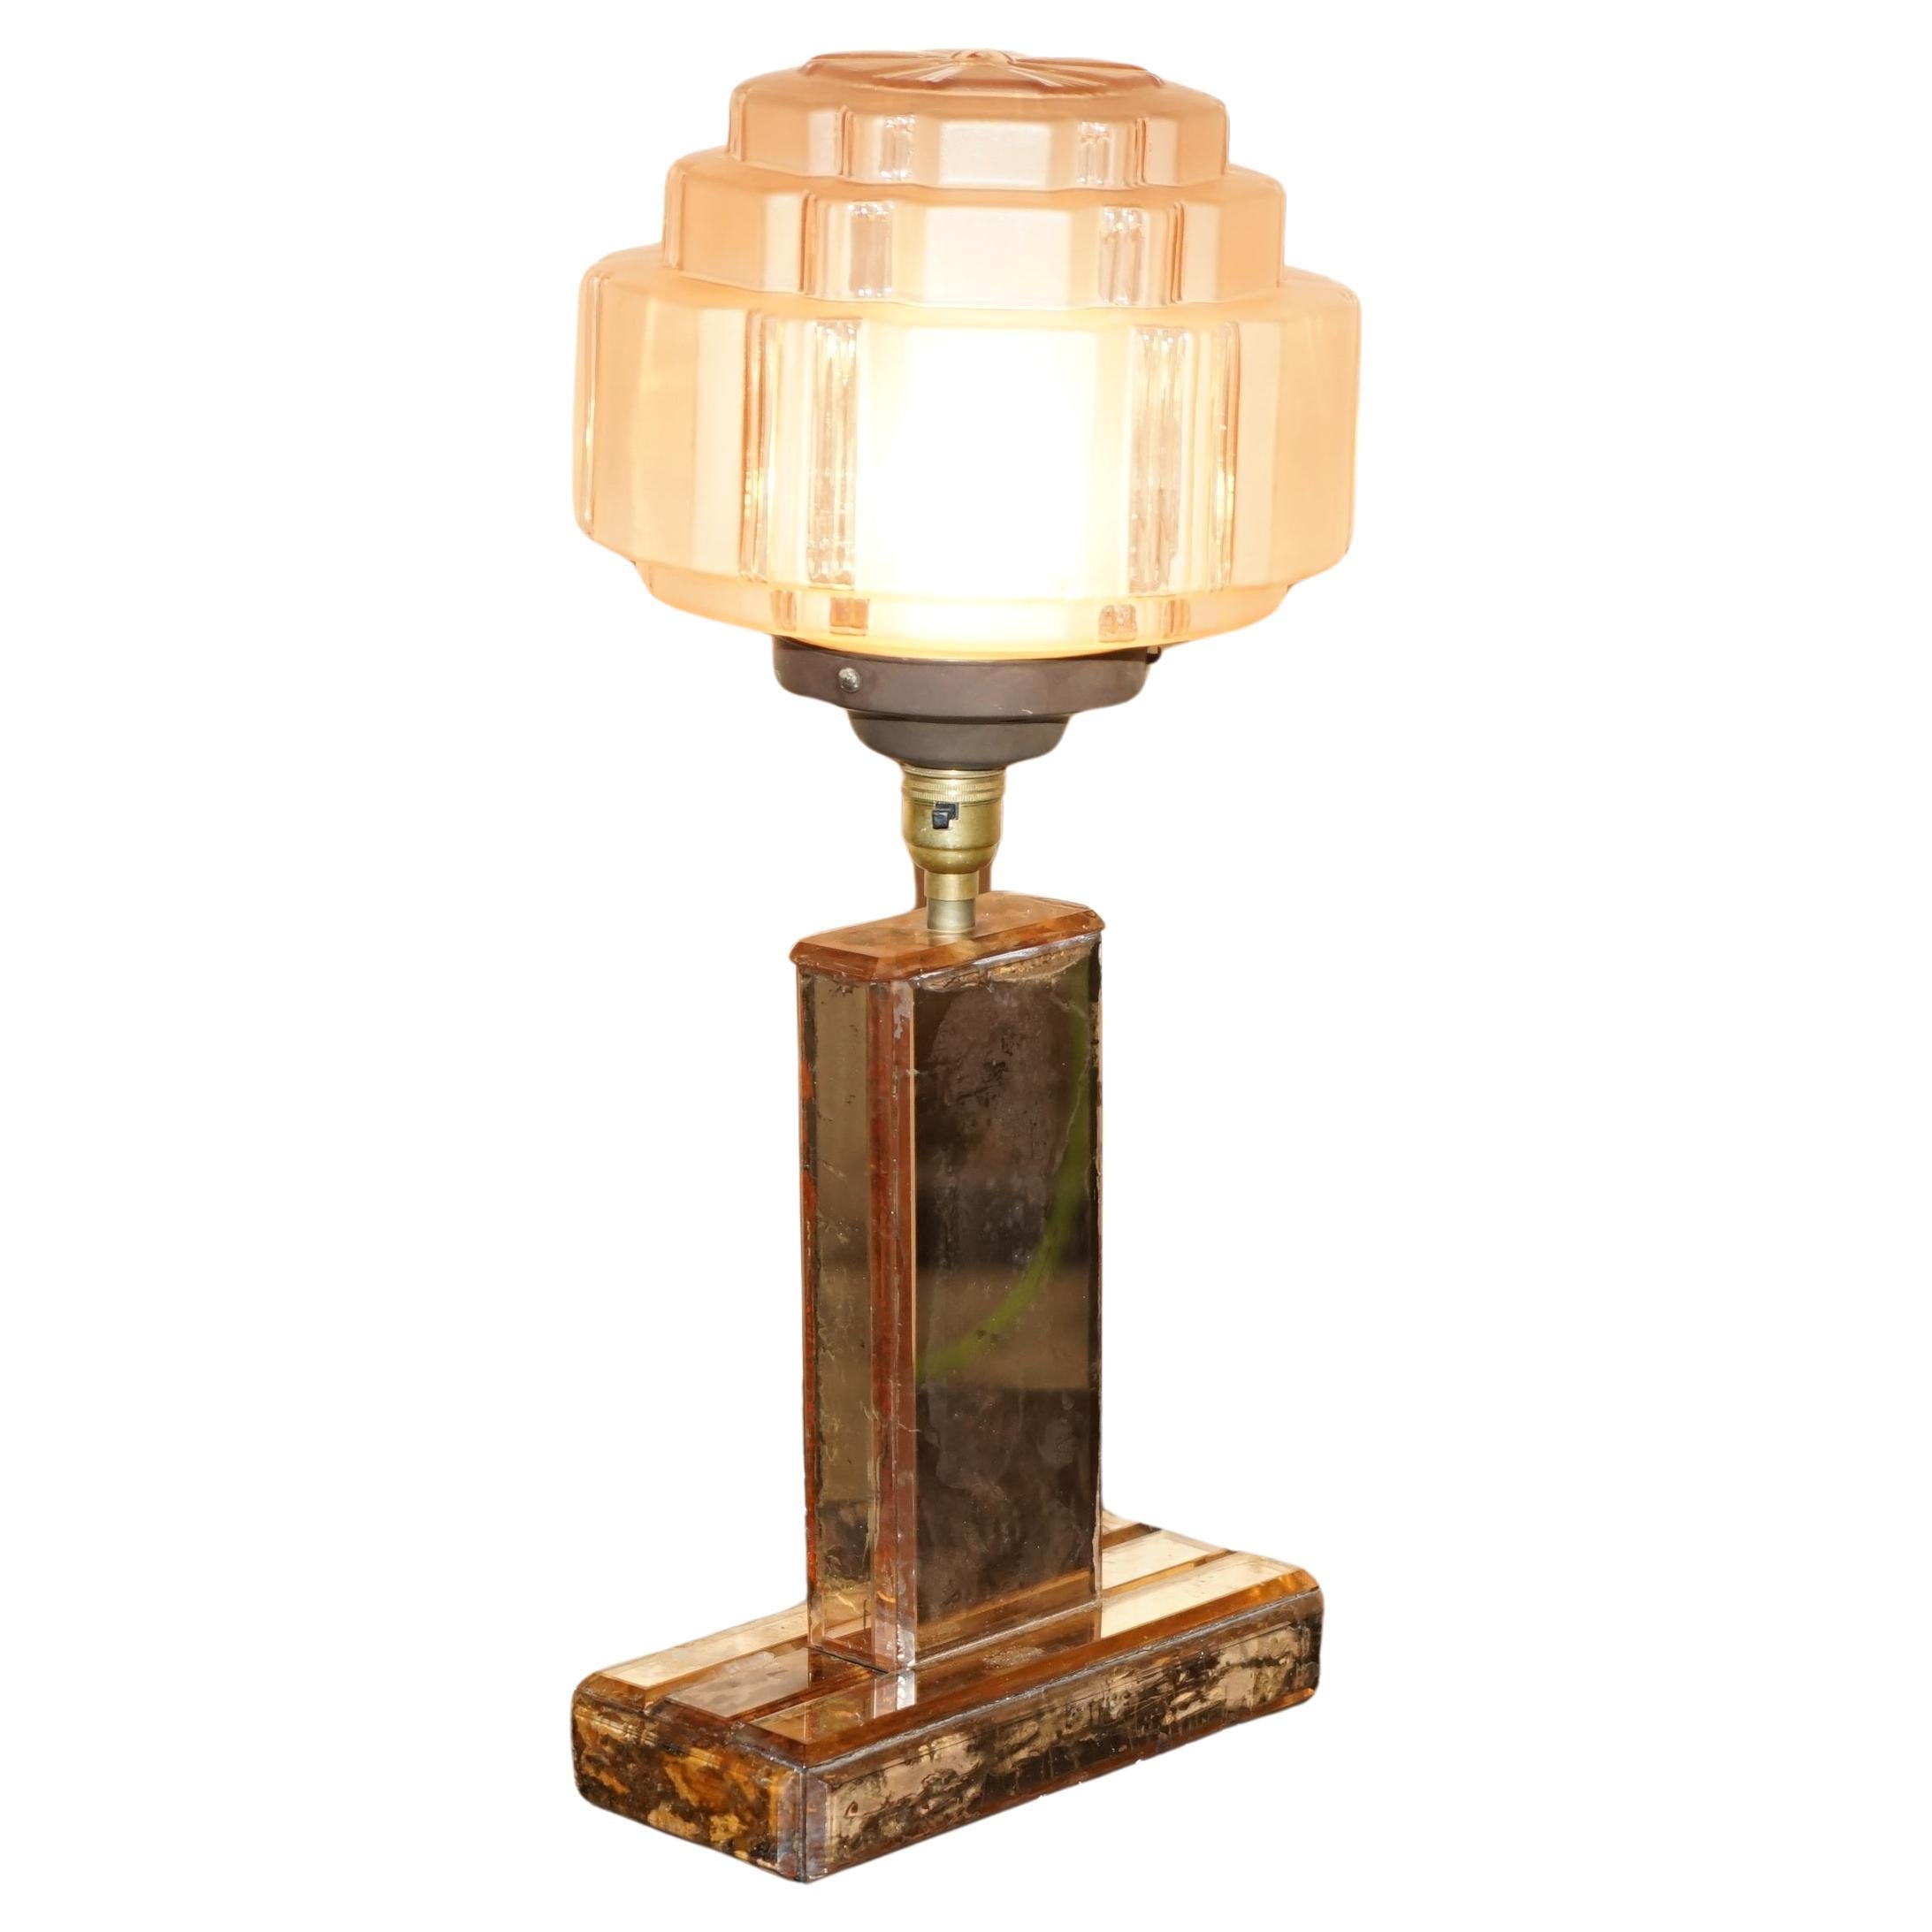 STUNNING ART DECO CIRCA 1930'S PEACH GLASS TABLE LAMP WITH MIRRORED PANELs For Sale